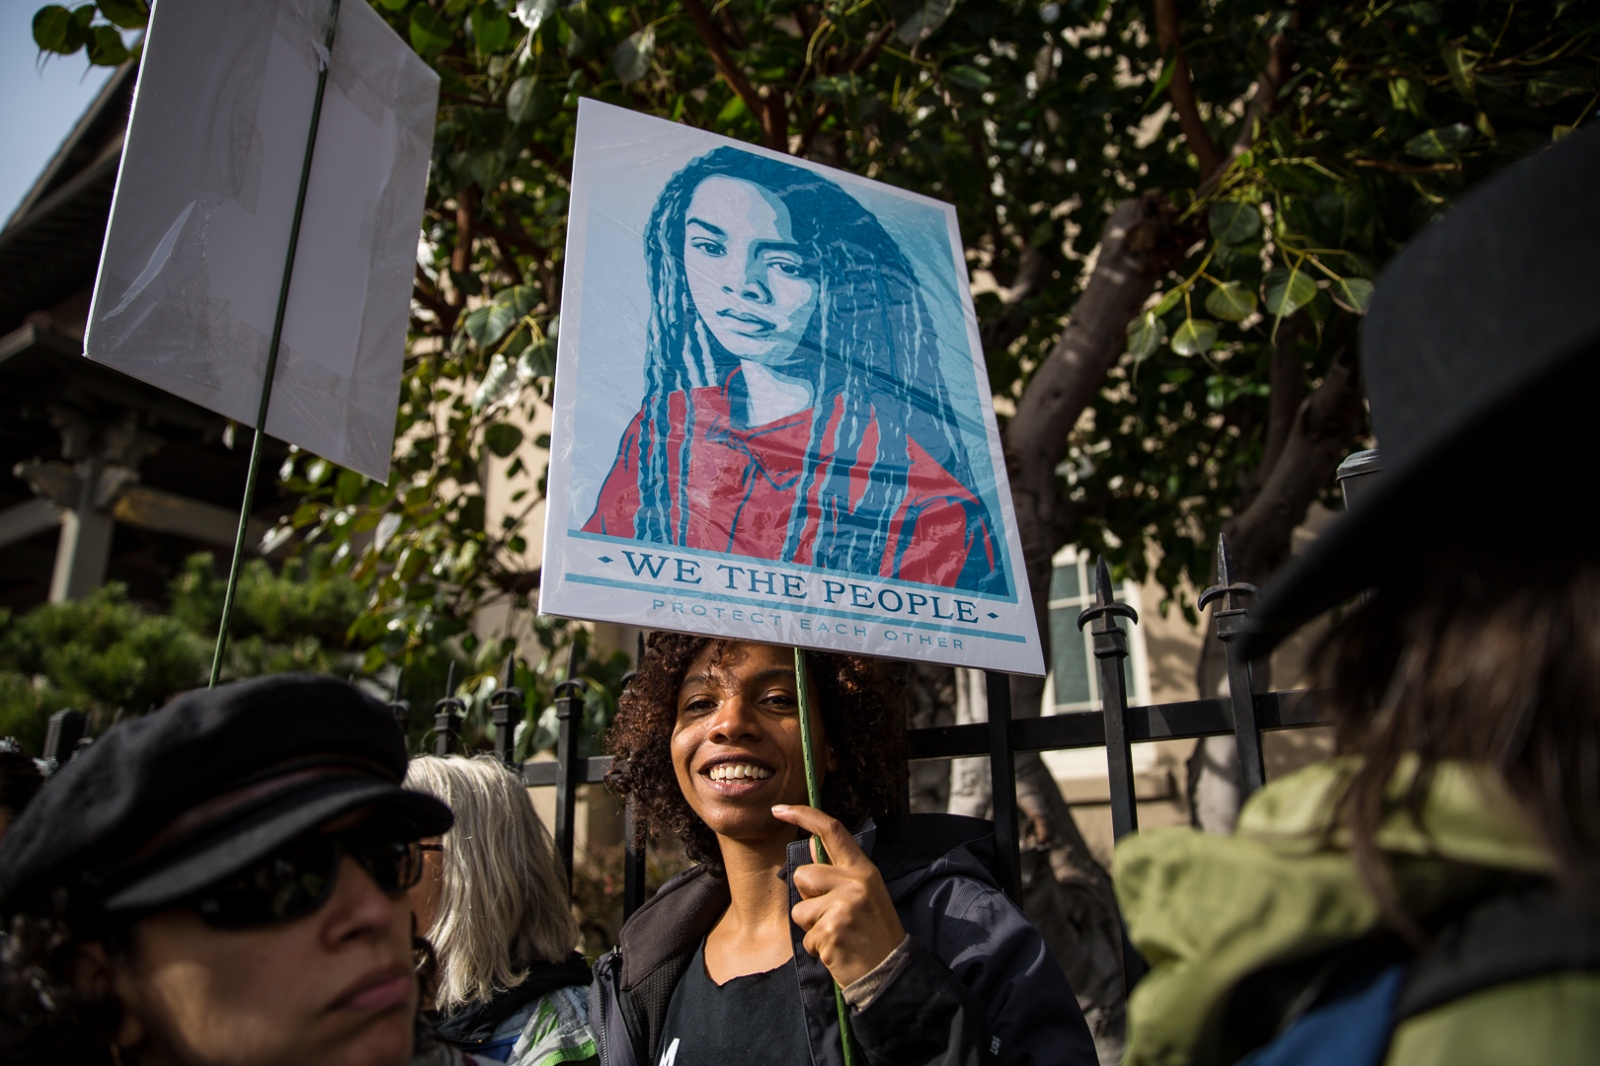 Women's March Oakland, CA  - A demonstrator at the Women's March in Oakland, CA,...